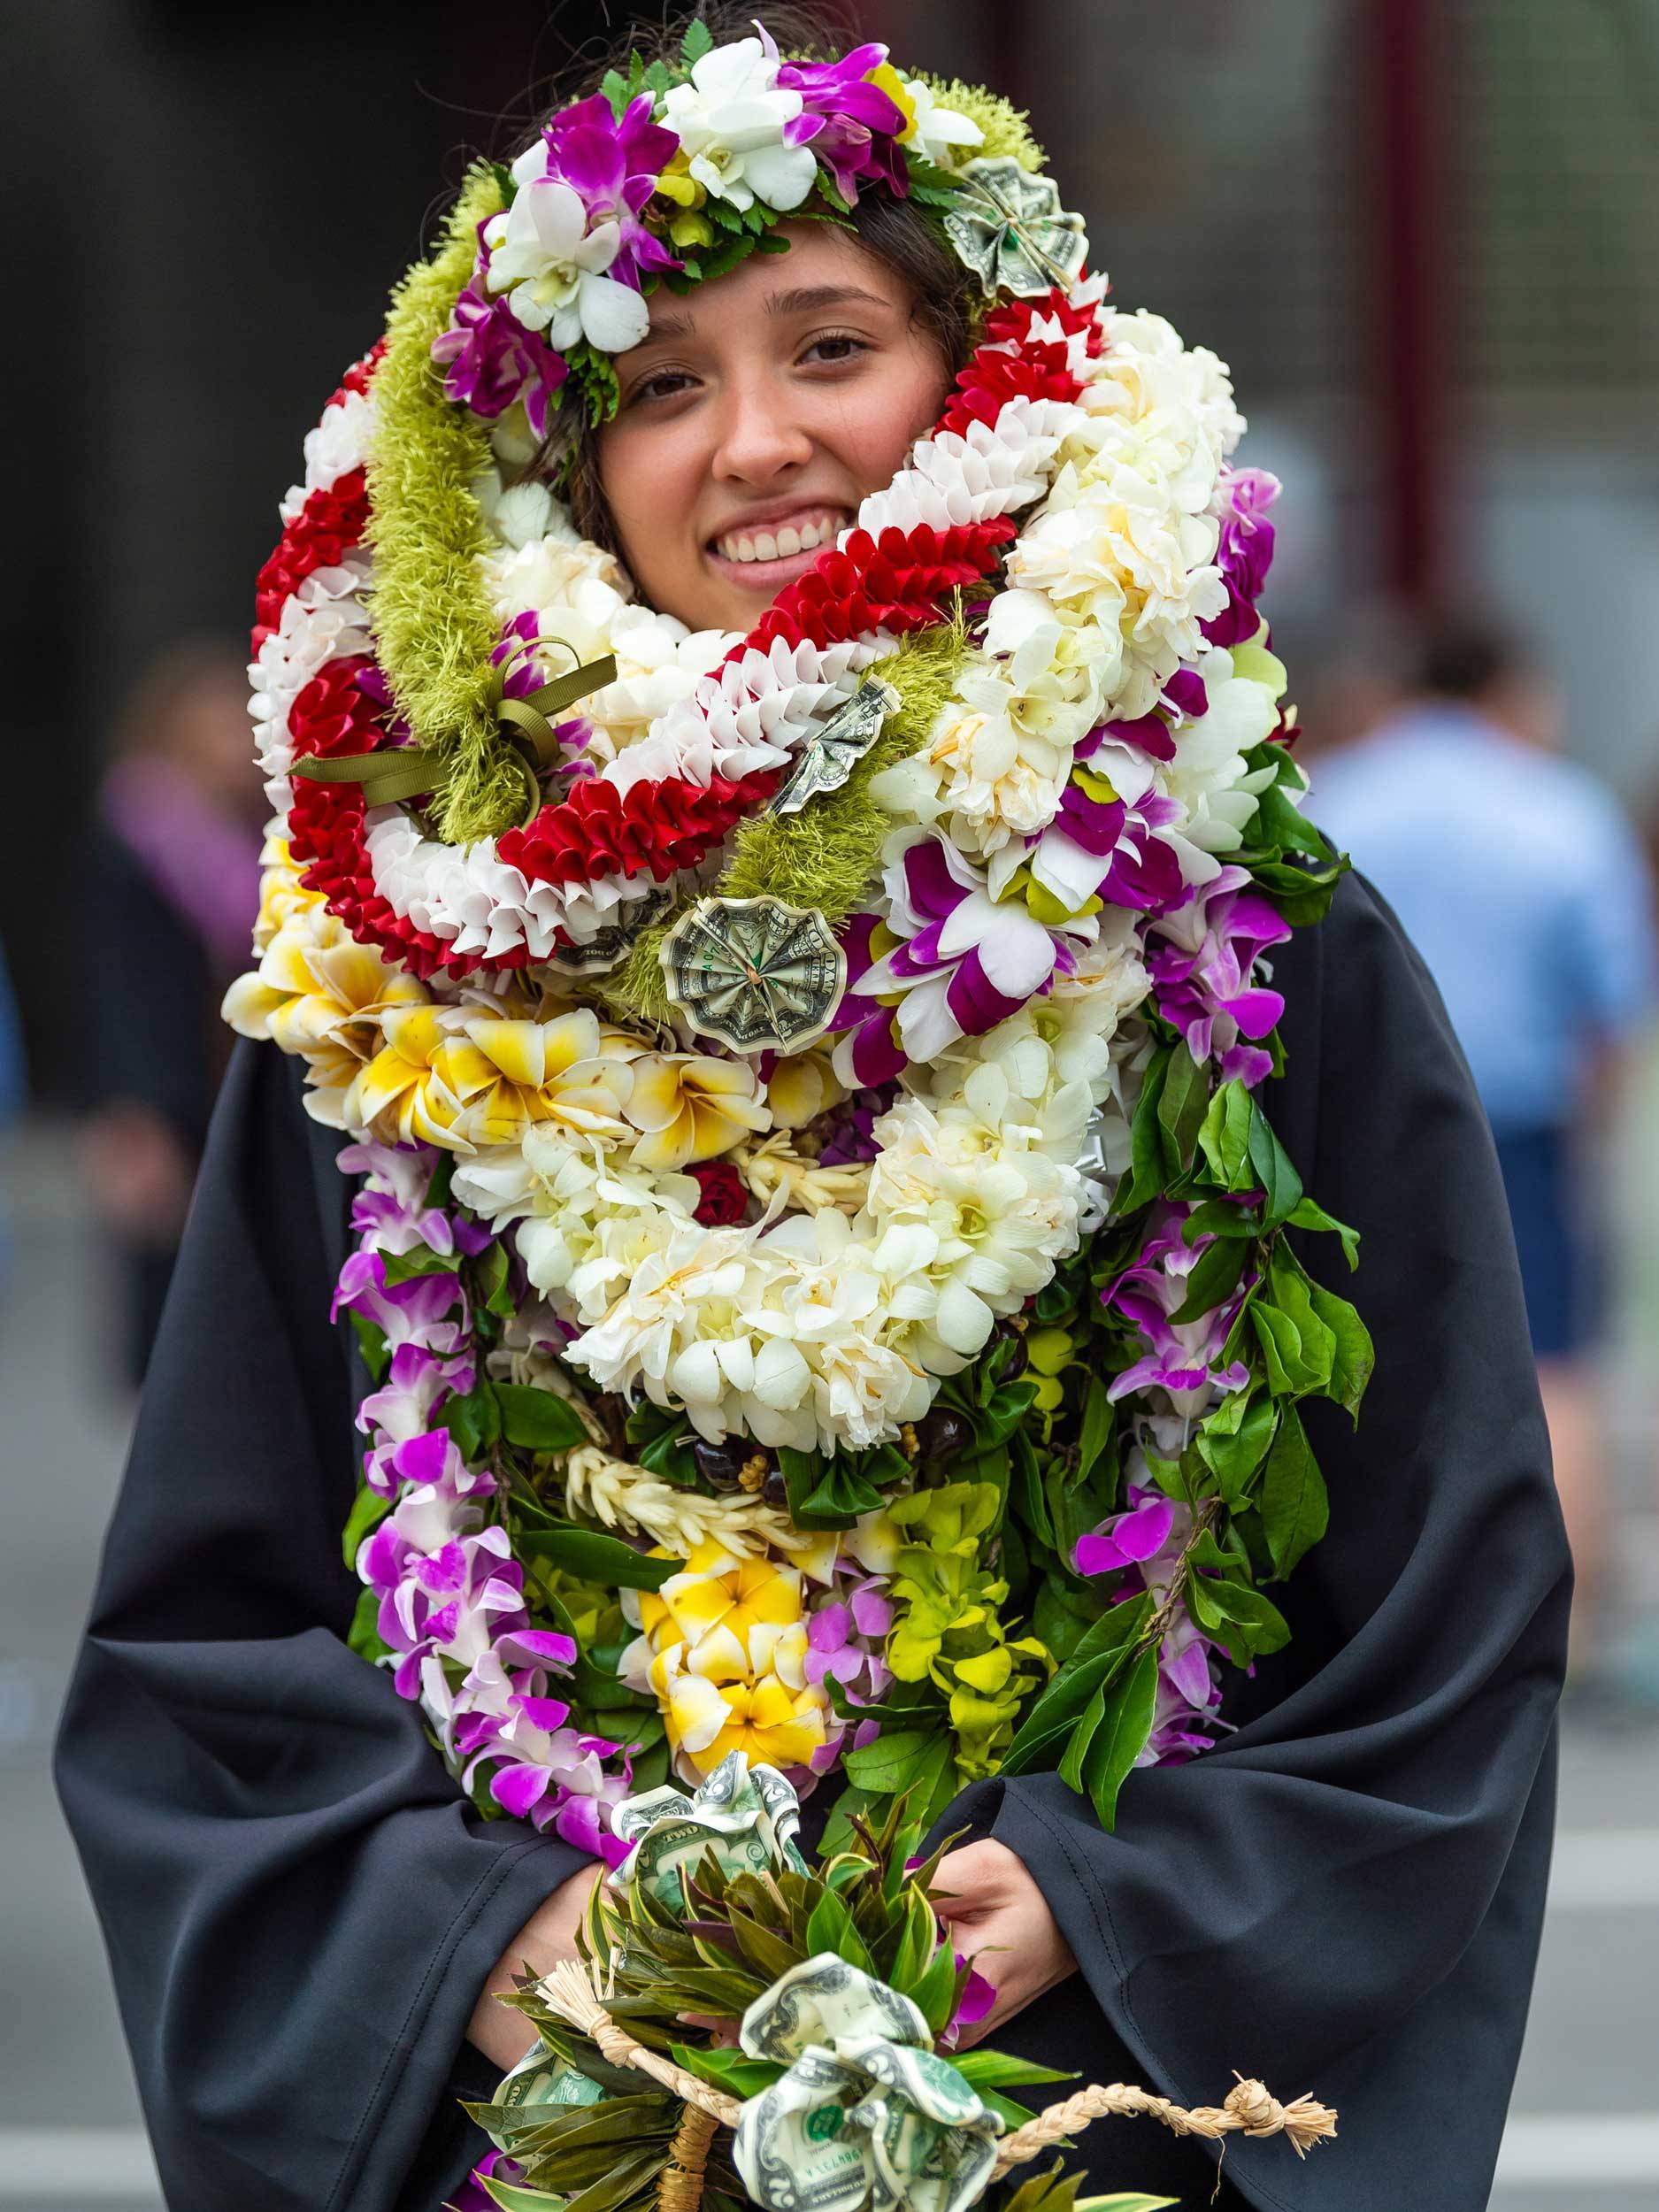 Student wrapped in flowers at commencement